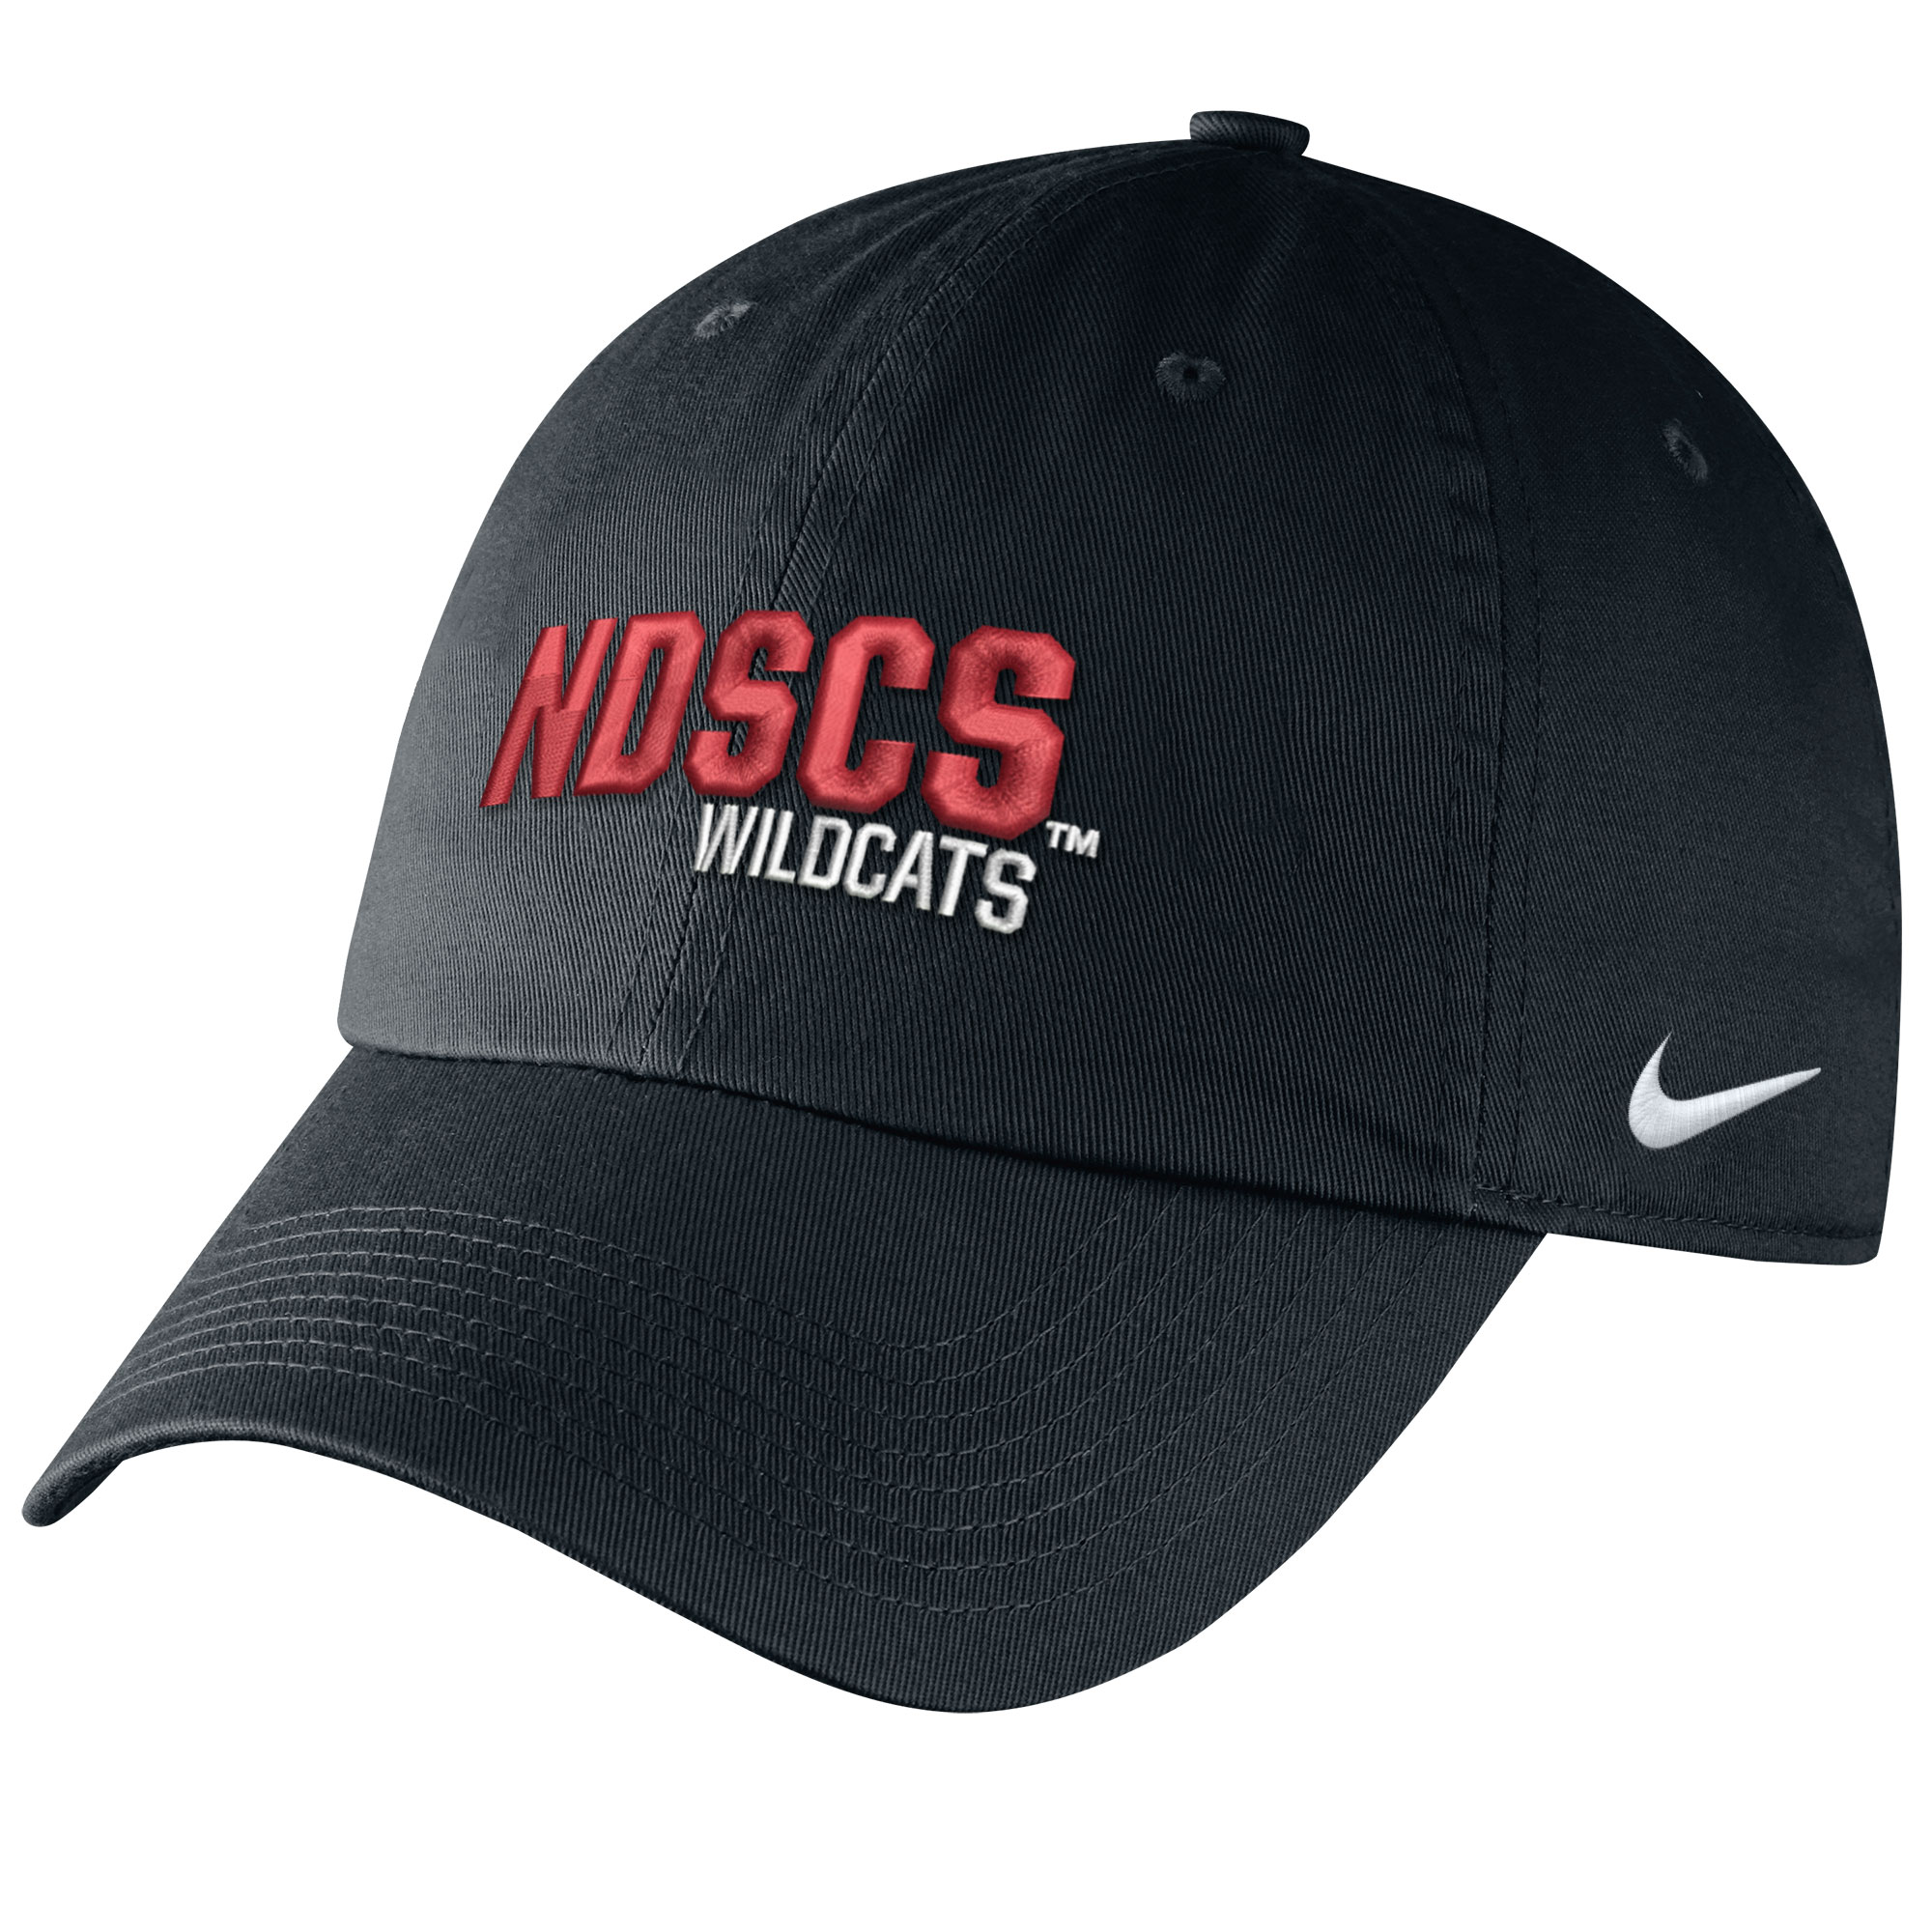 Campus Cap - by Nike